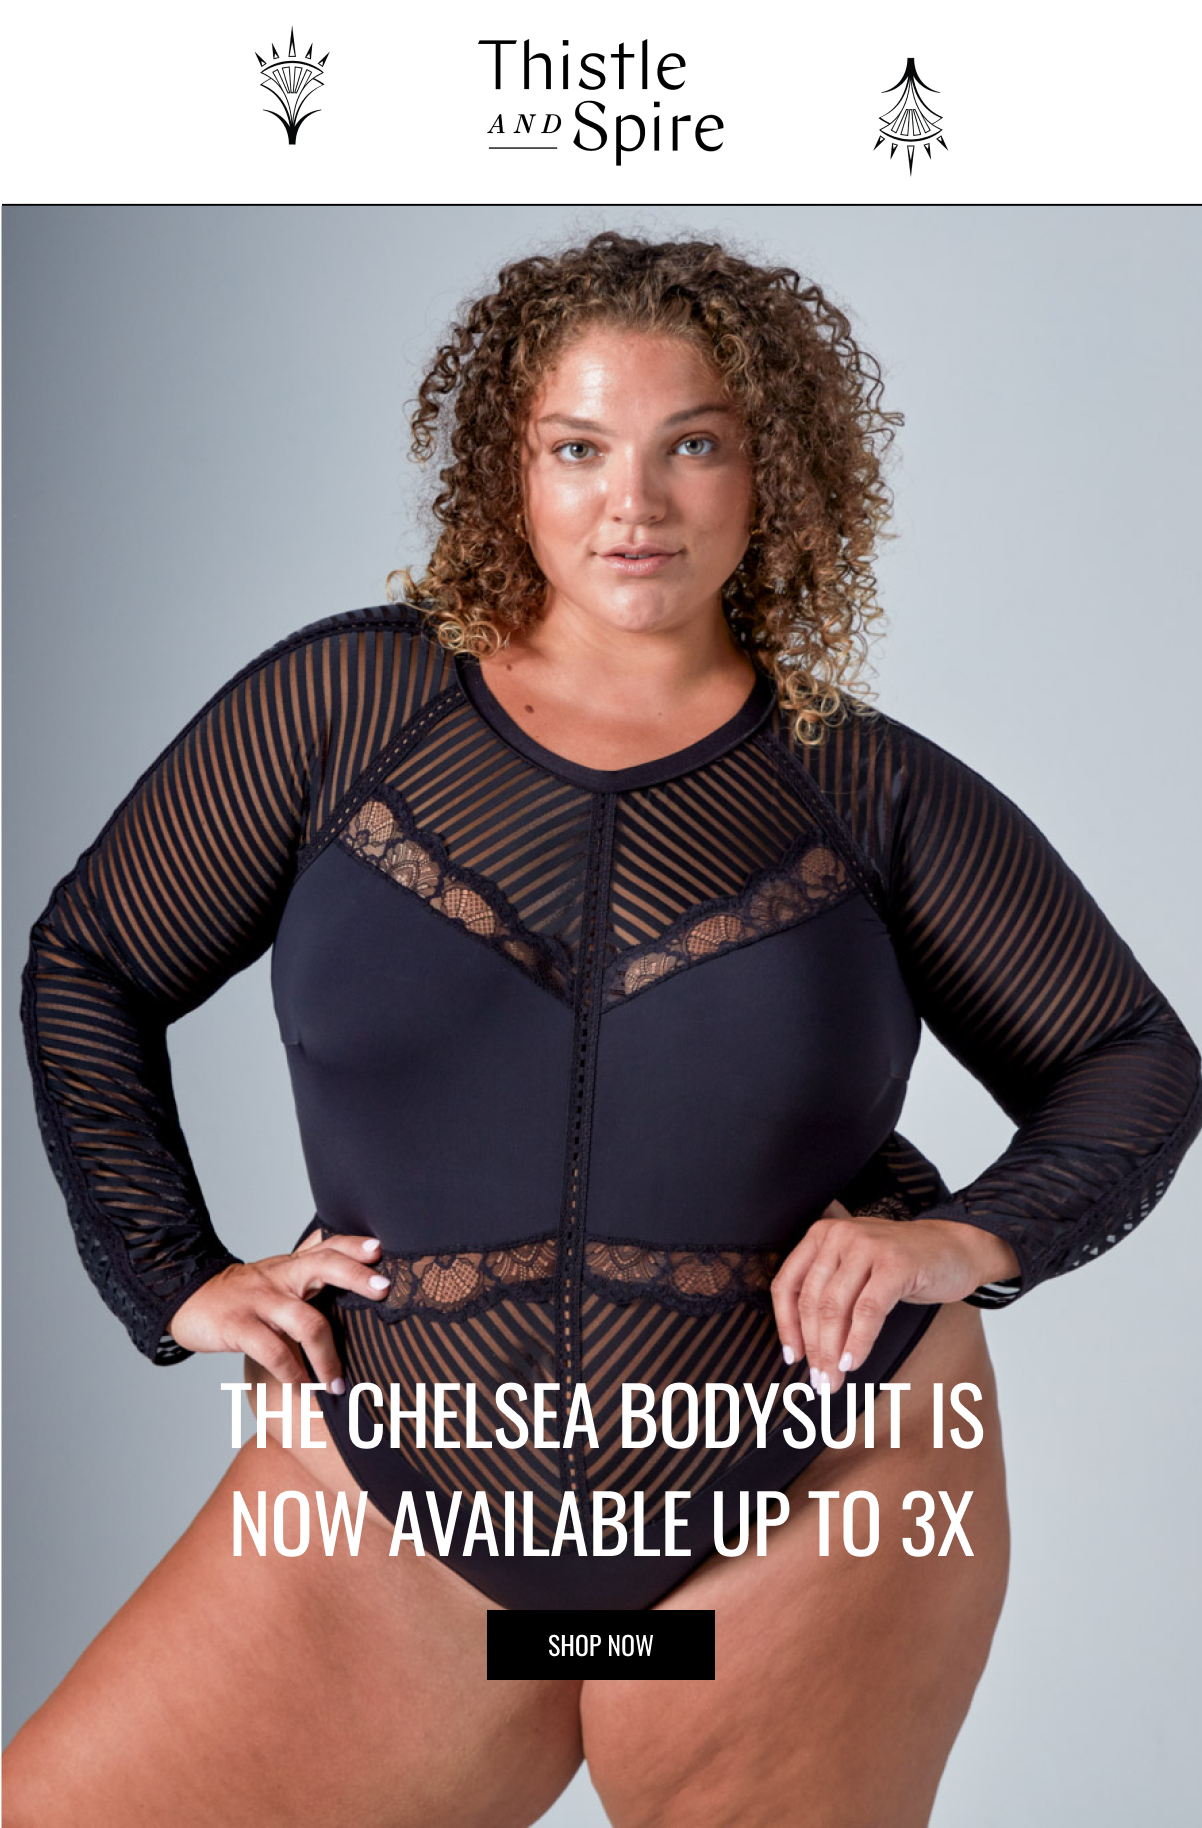 Thistle and Spire: The Chelsea Bodysuit Now Available Up To 3X